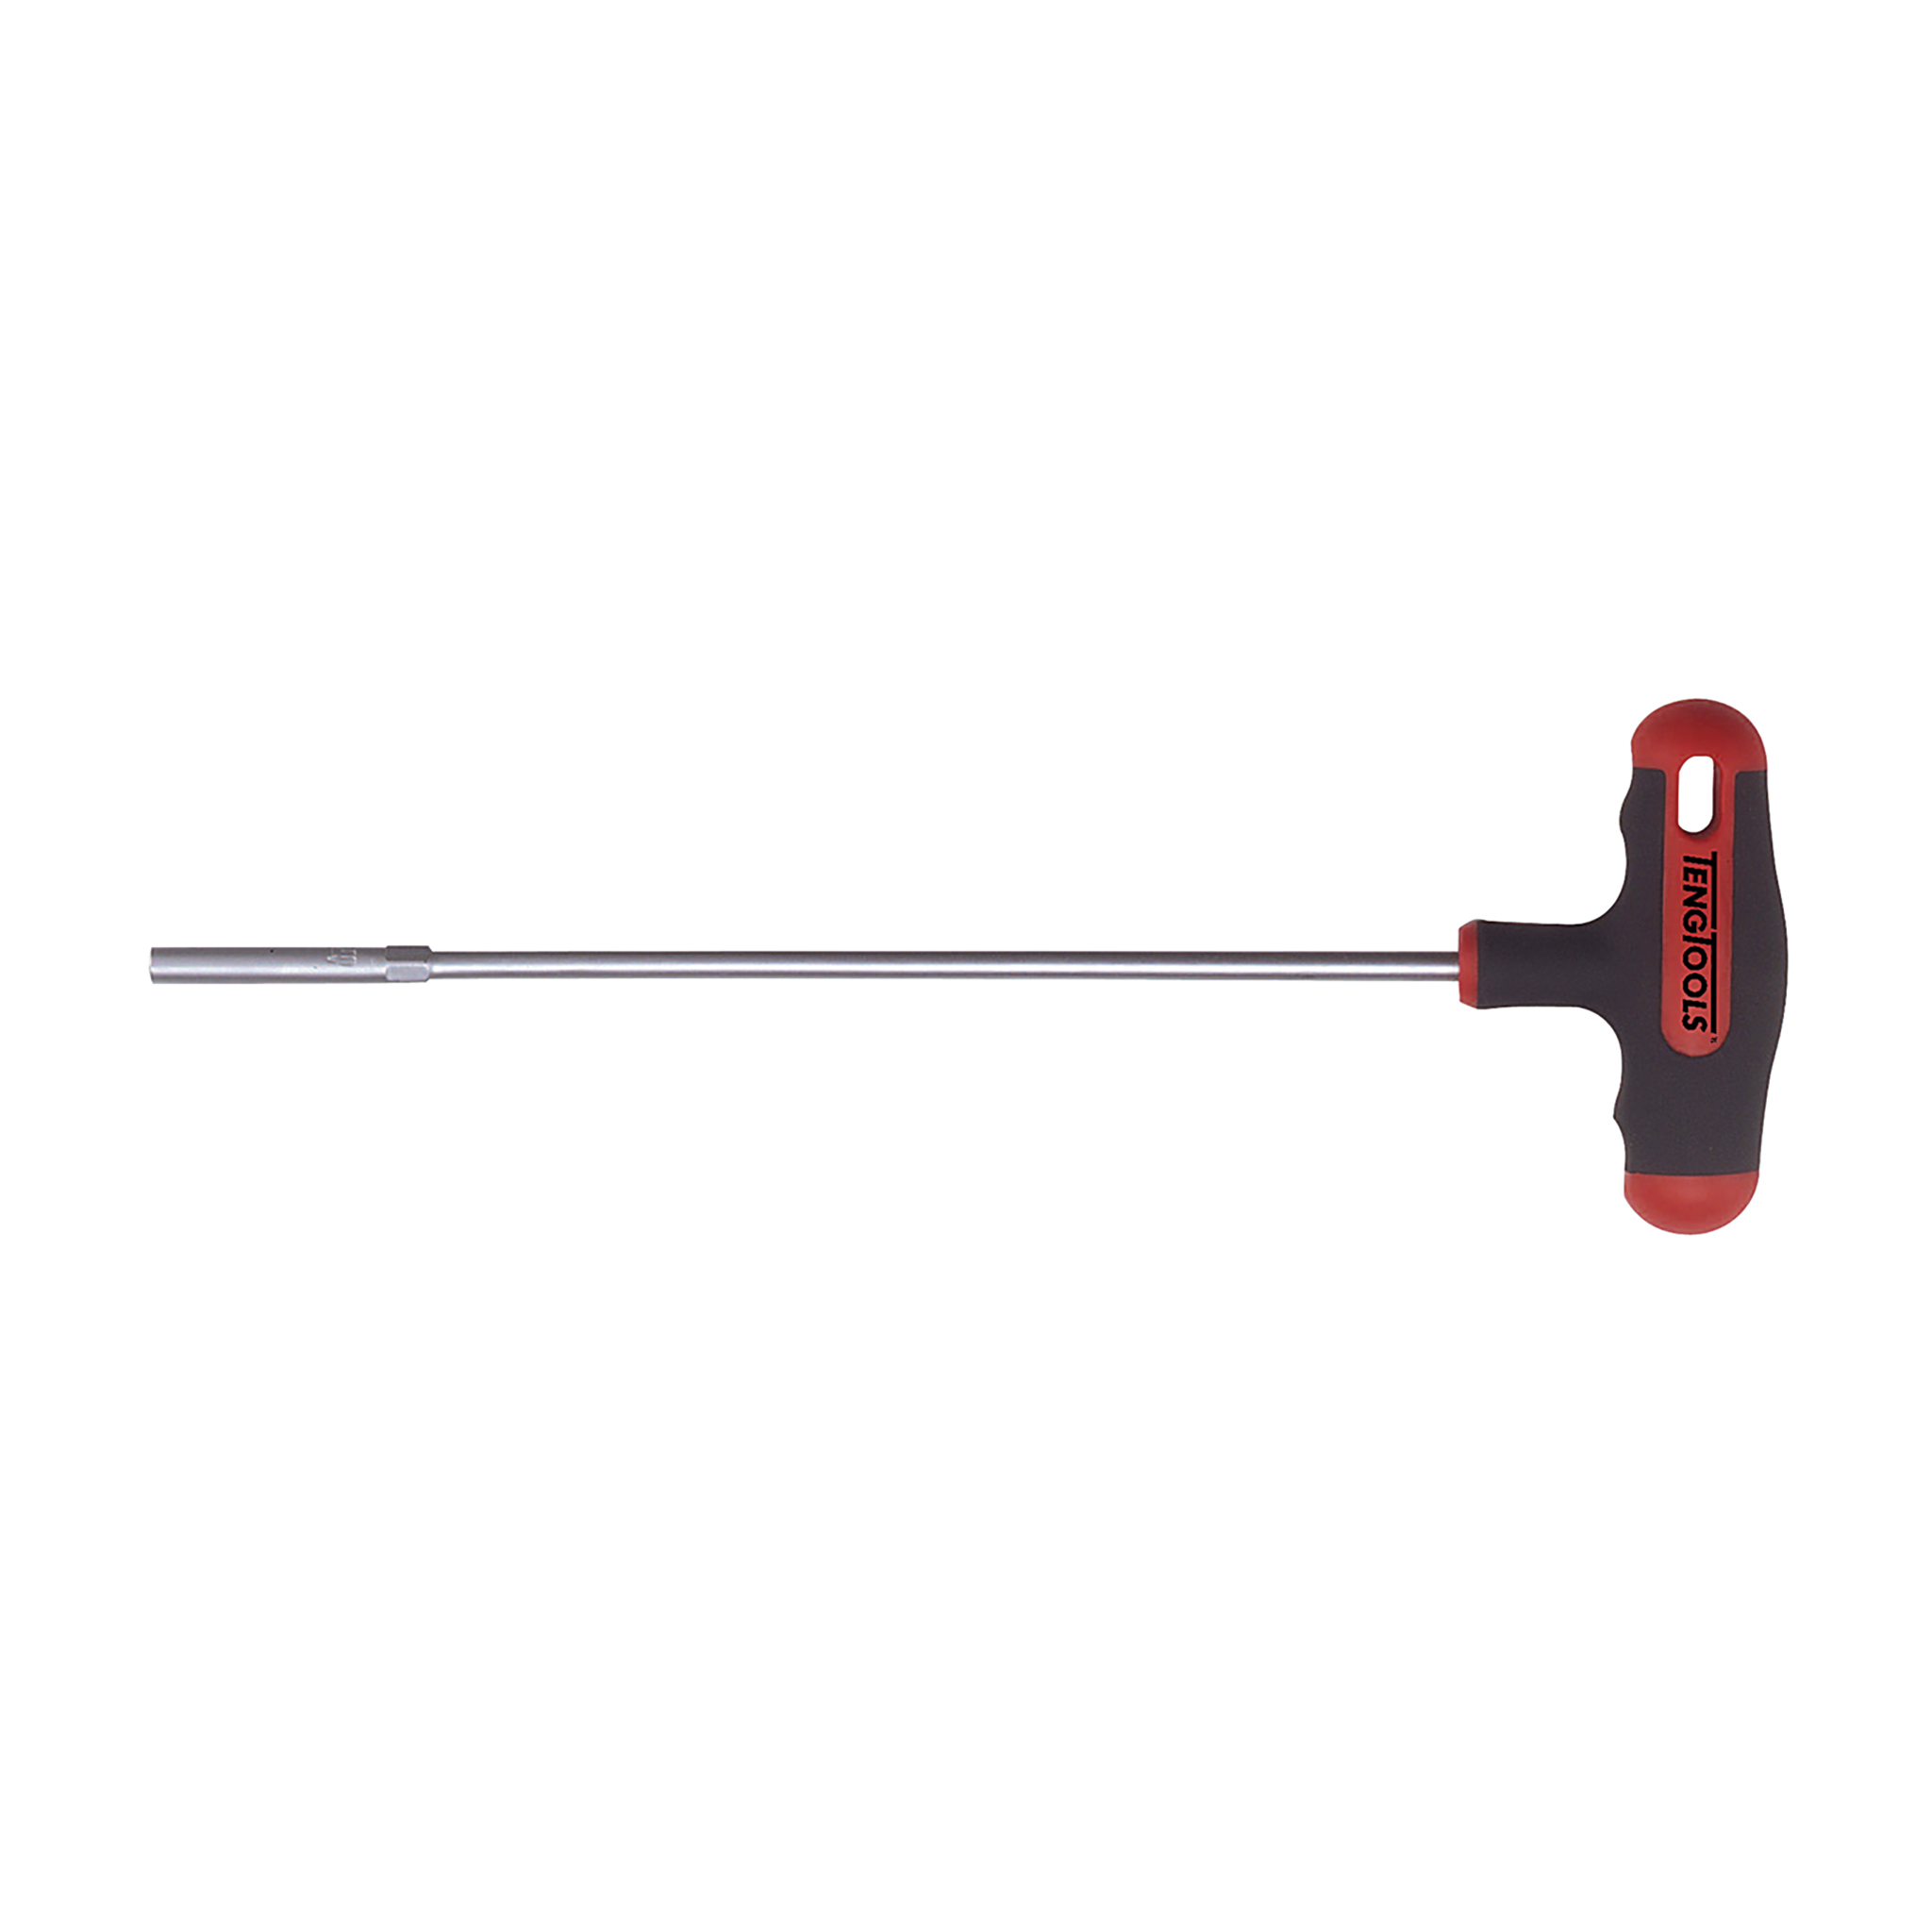 Teng Tools 5mm Mega Drive 6 Point Opening T-Handle Nut Driver - MDNT405